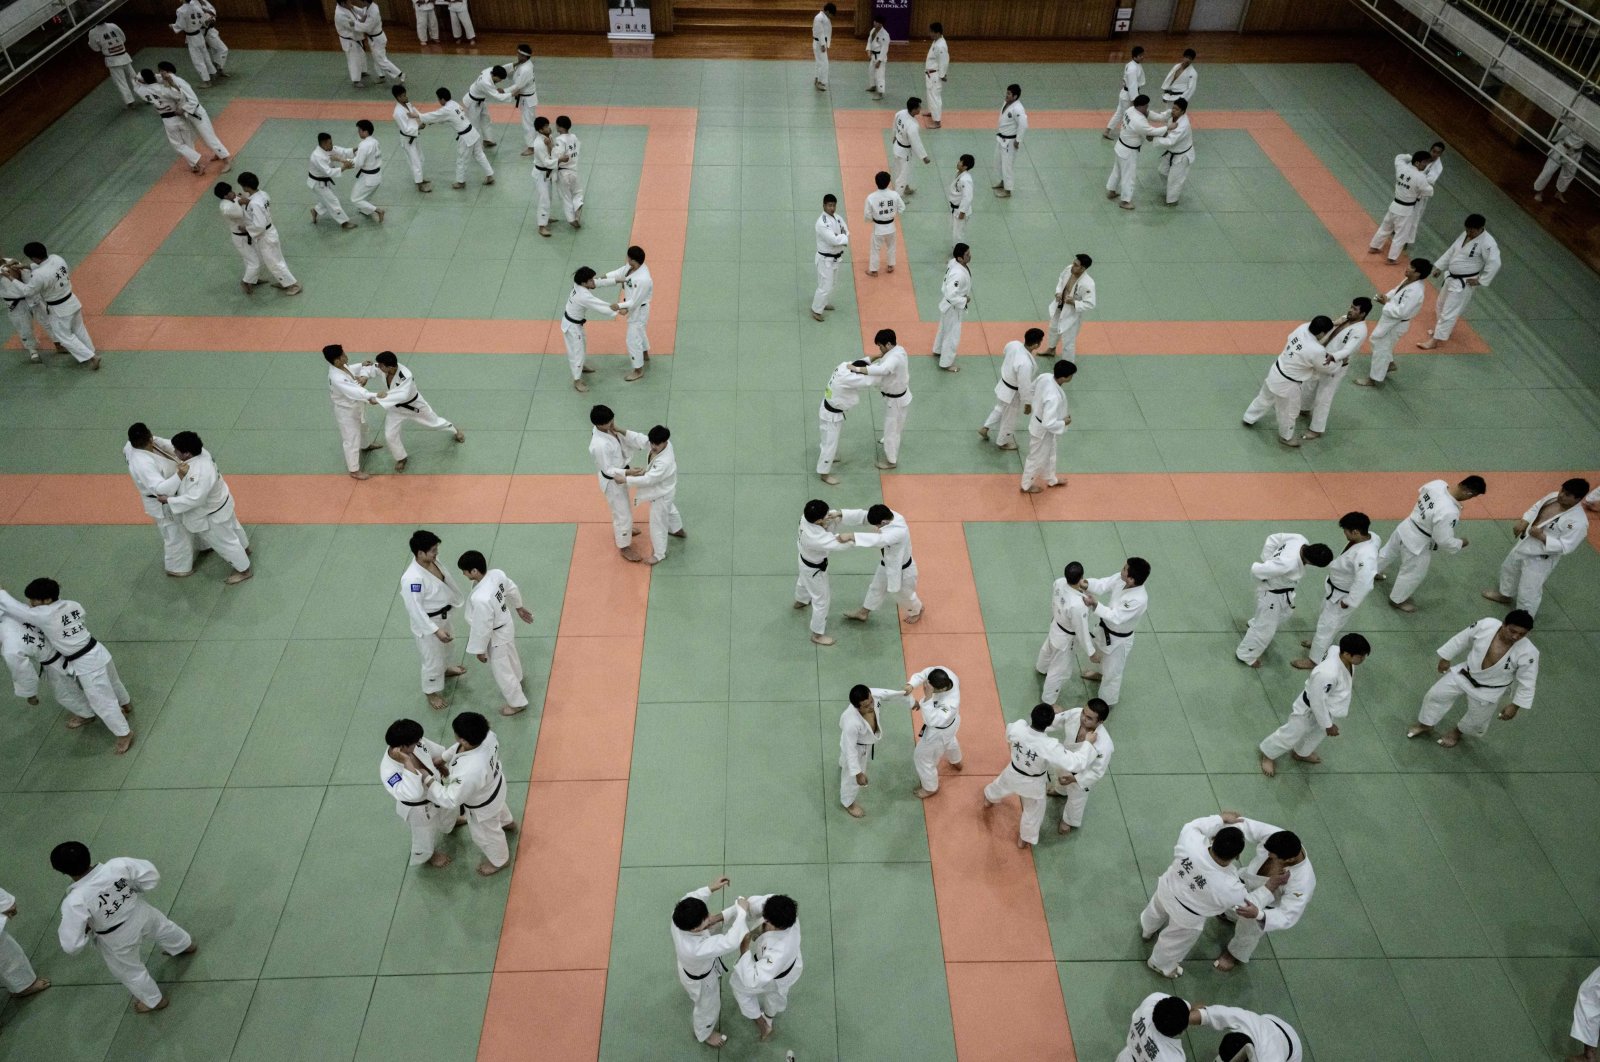 Judokas wrestle during a weekly freestyle practice session in Tokyo, Japan, Feb. 19, 2020. (AFP Photo)